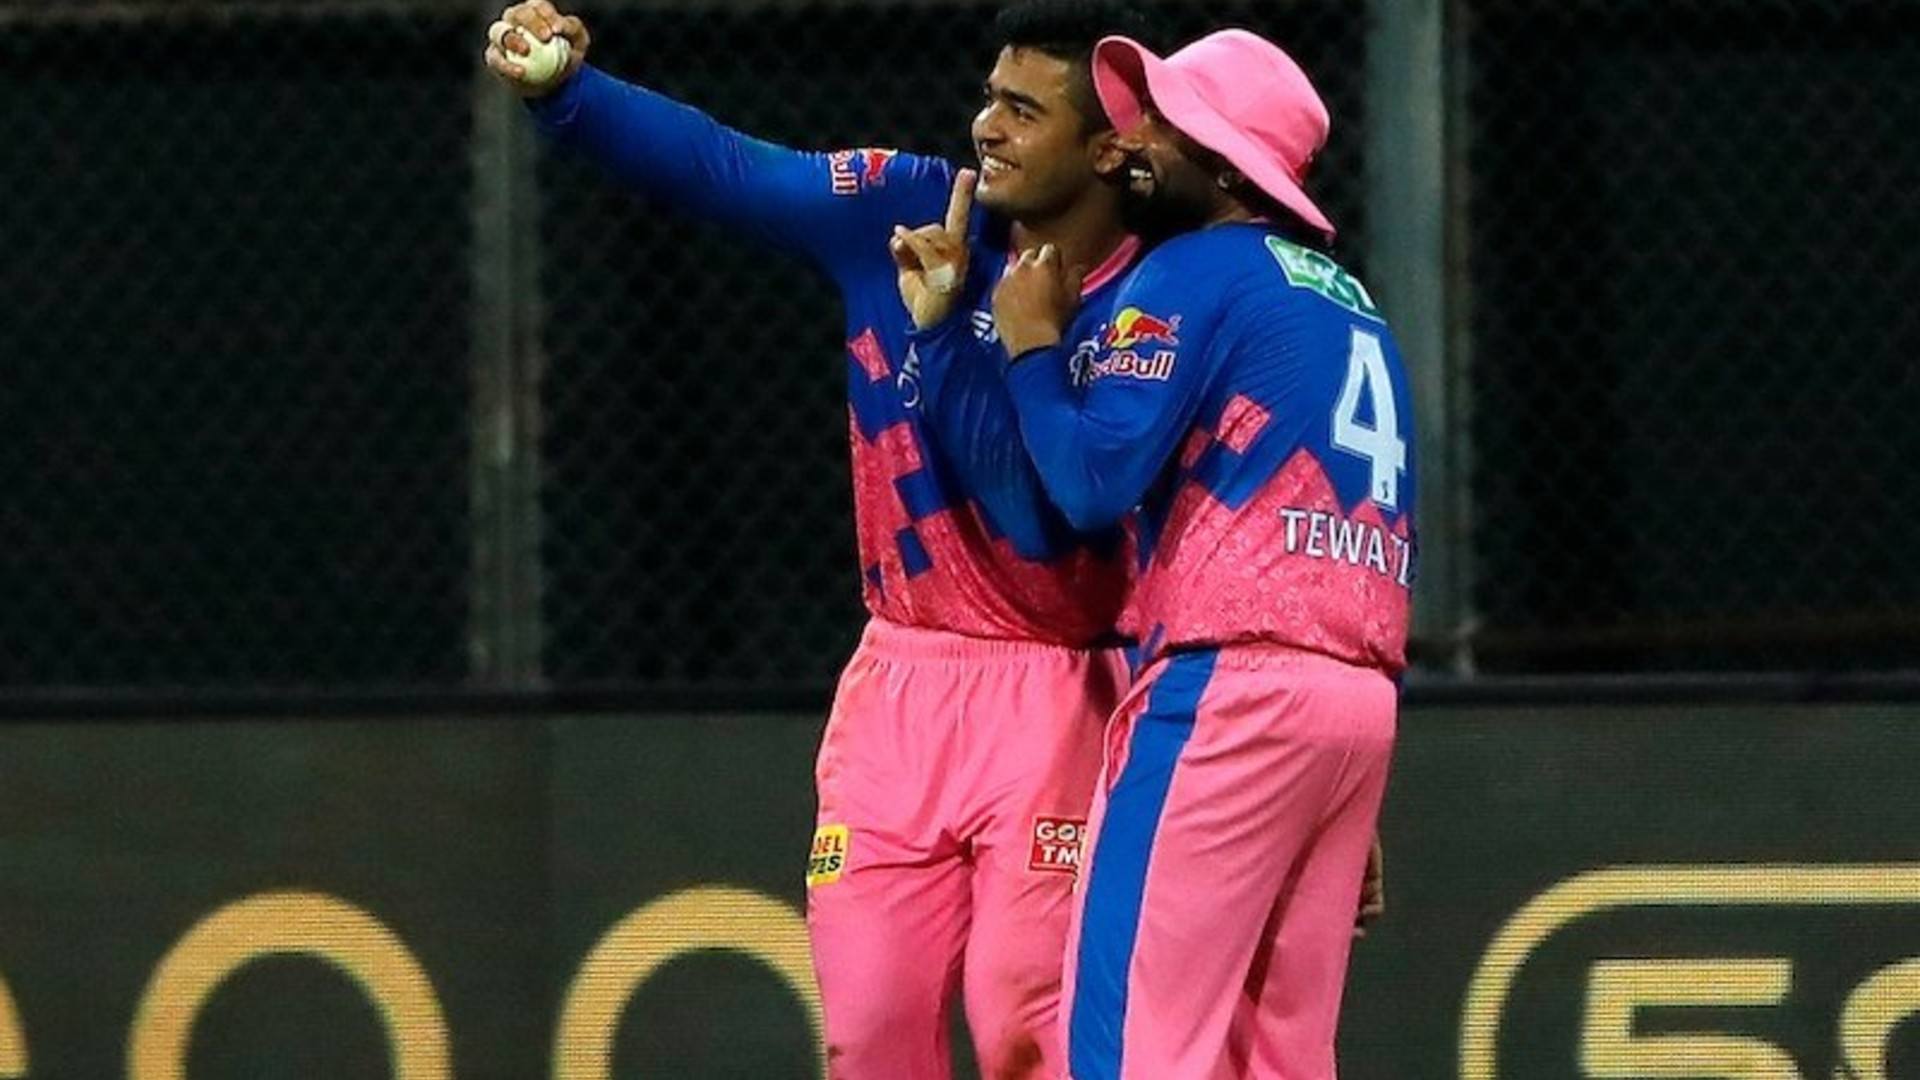 Riyan Parag and Rahul Tewatia pulled off a lovely celebration. (Image credit: Twitter)